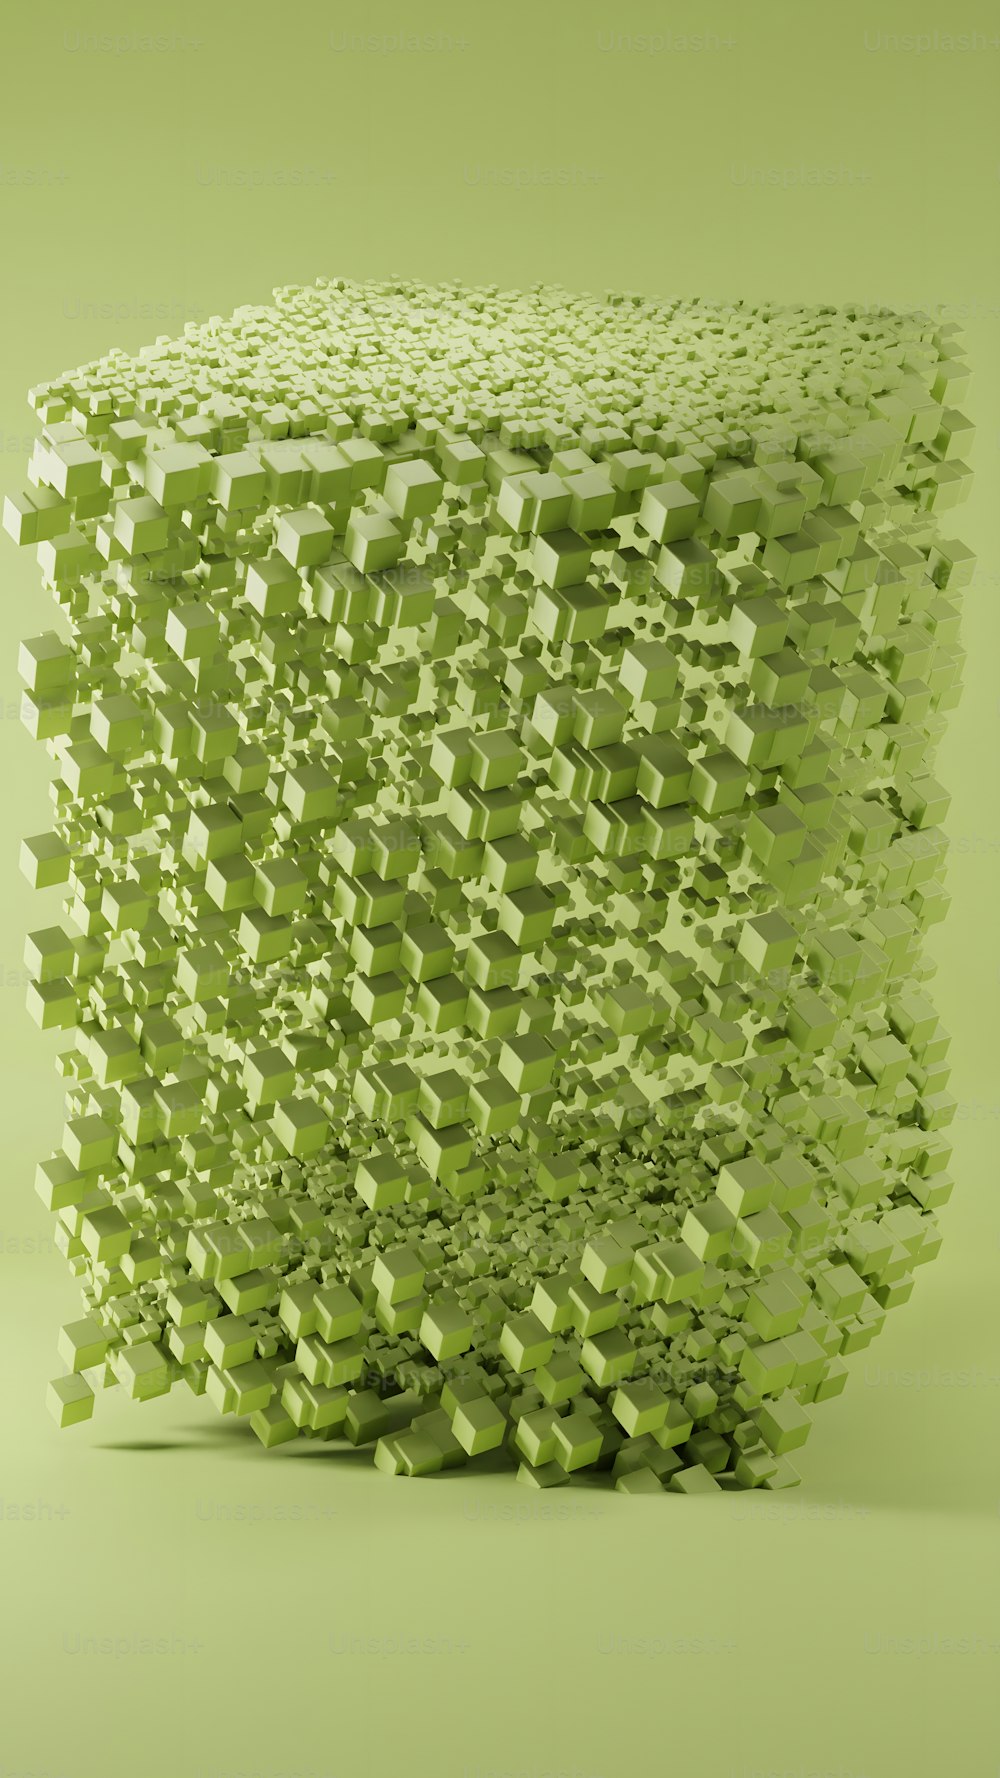 a sculpture made out of green cubes on a green background